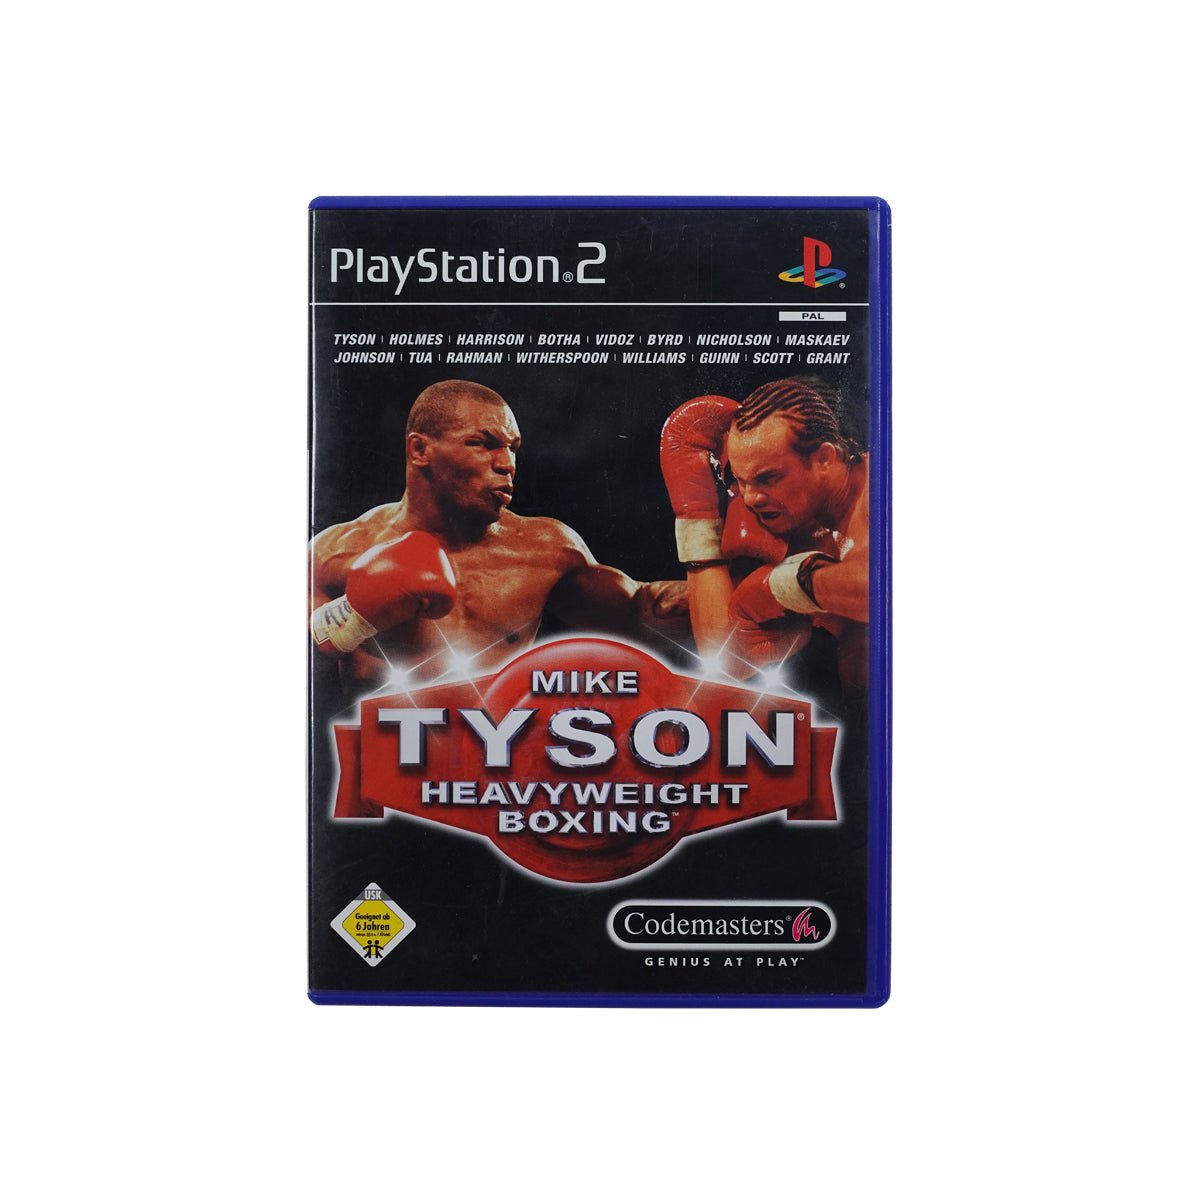 (Pre-Owned) Mike Tyson Heavyweight Boxing - PlayStation 2 - Store 974 | ستور ٩٧٤